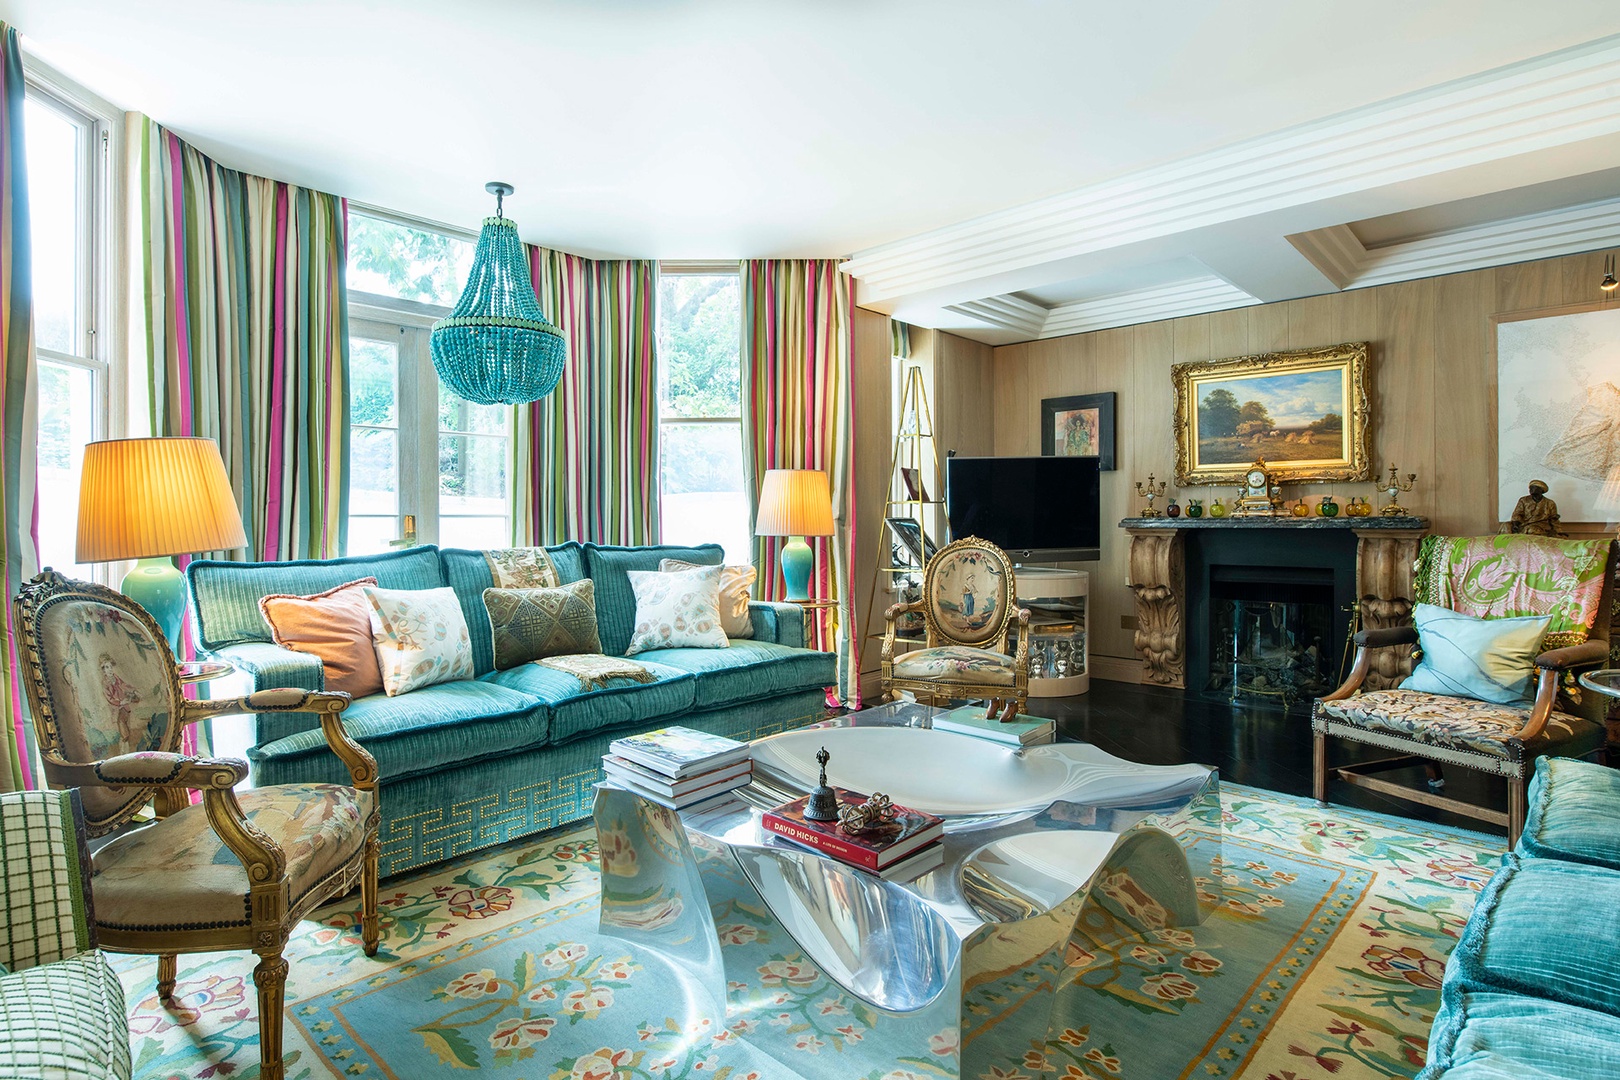 Welcome to the elegant Phillimore apartment in Kensington.